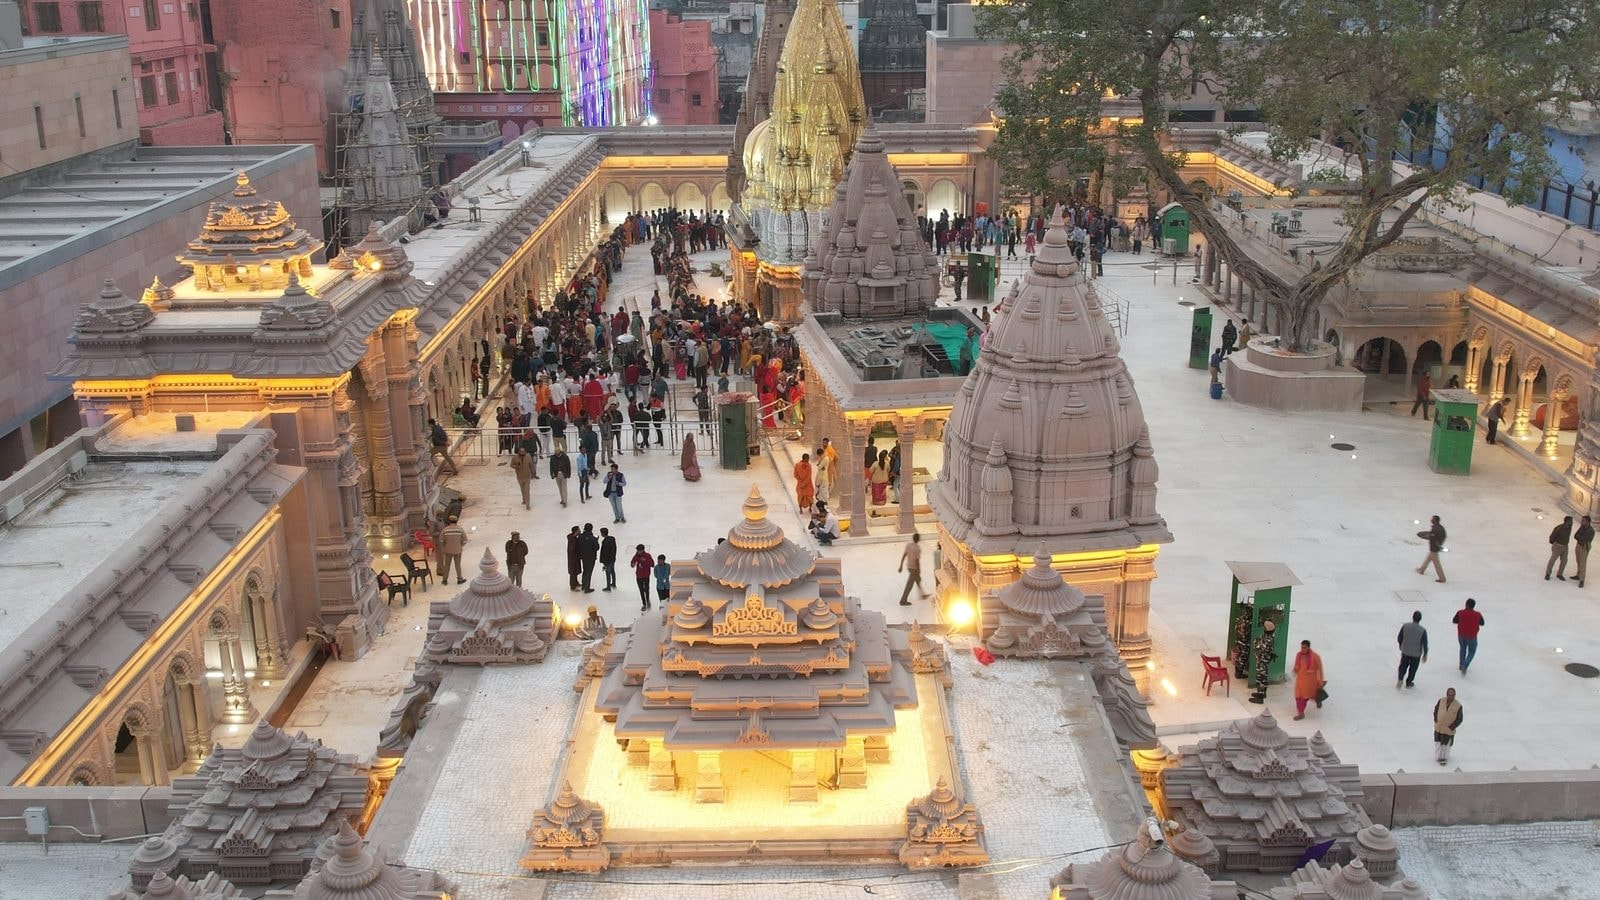 Govt deputes CISF to provide security consultancy for Kashi Vishwanath  temple complex